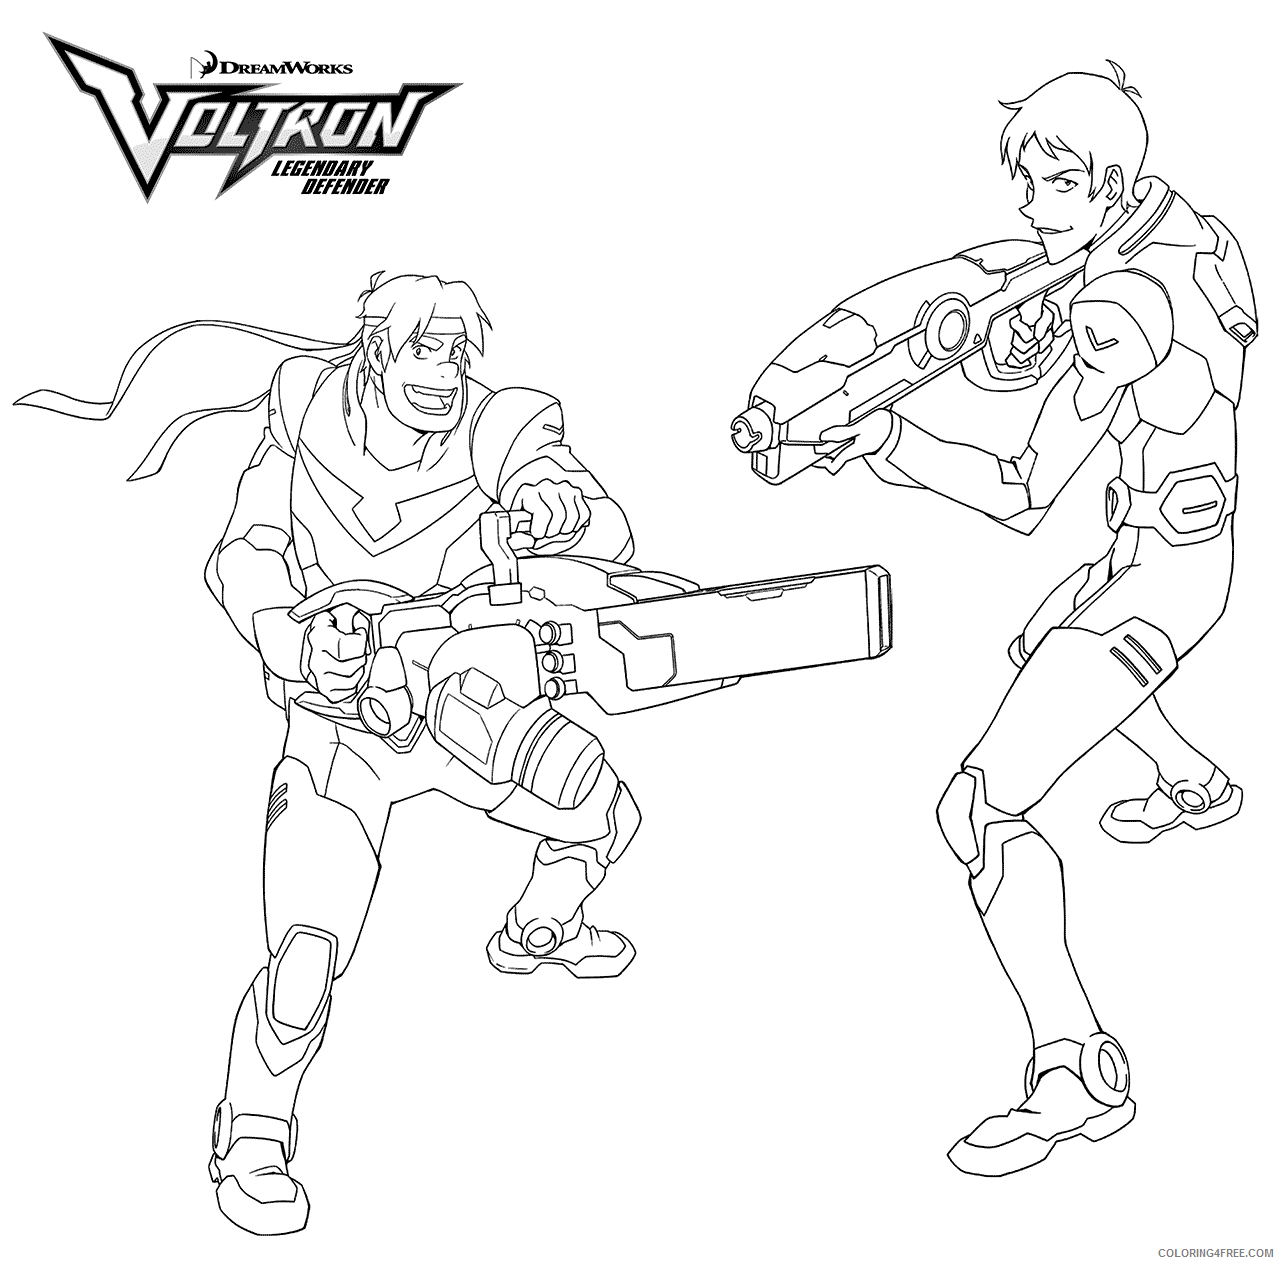 Voltron Coloring Pages TV Film Voltron Printable 2020 11122 Coloring4free